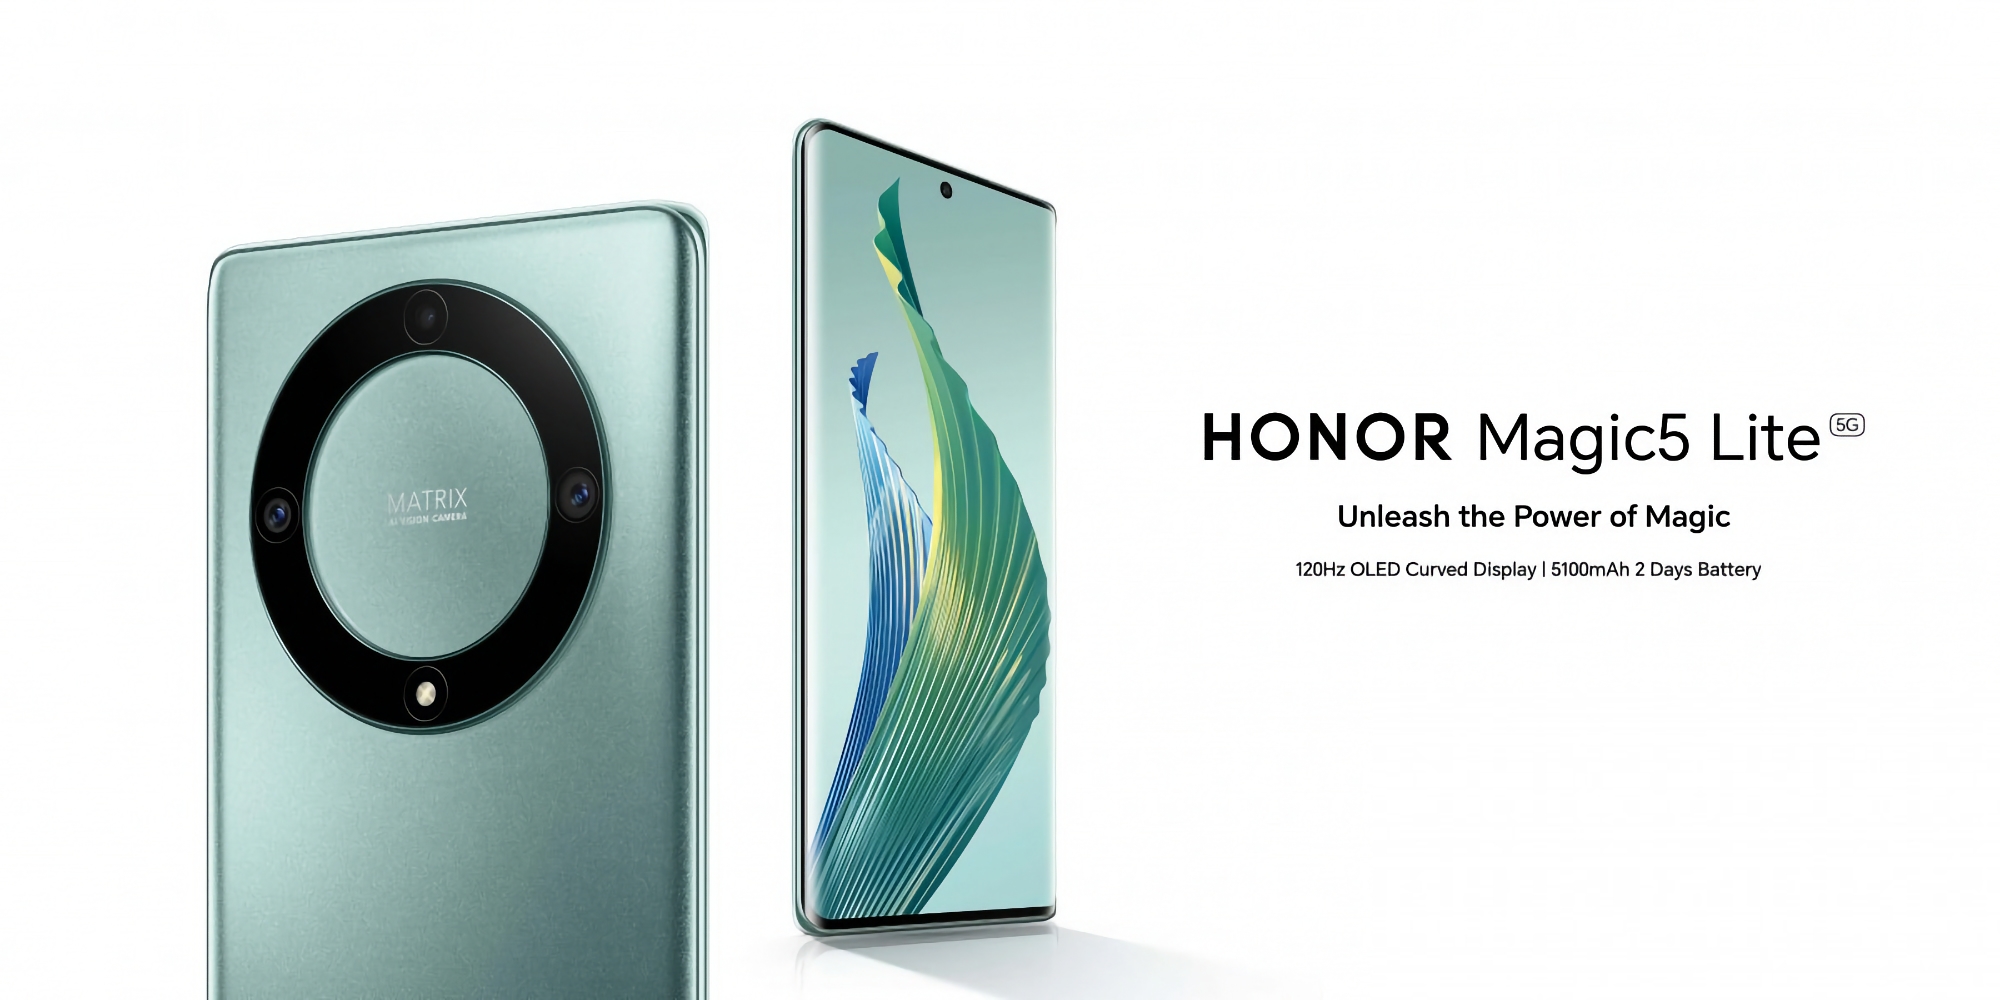 Honor Magic 5 Lite debuted in Europe: 120Hz AMOLED screen, Snapdragon 695  chip and 5100mAh battery for €379